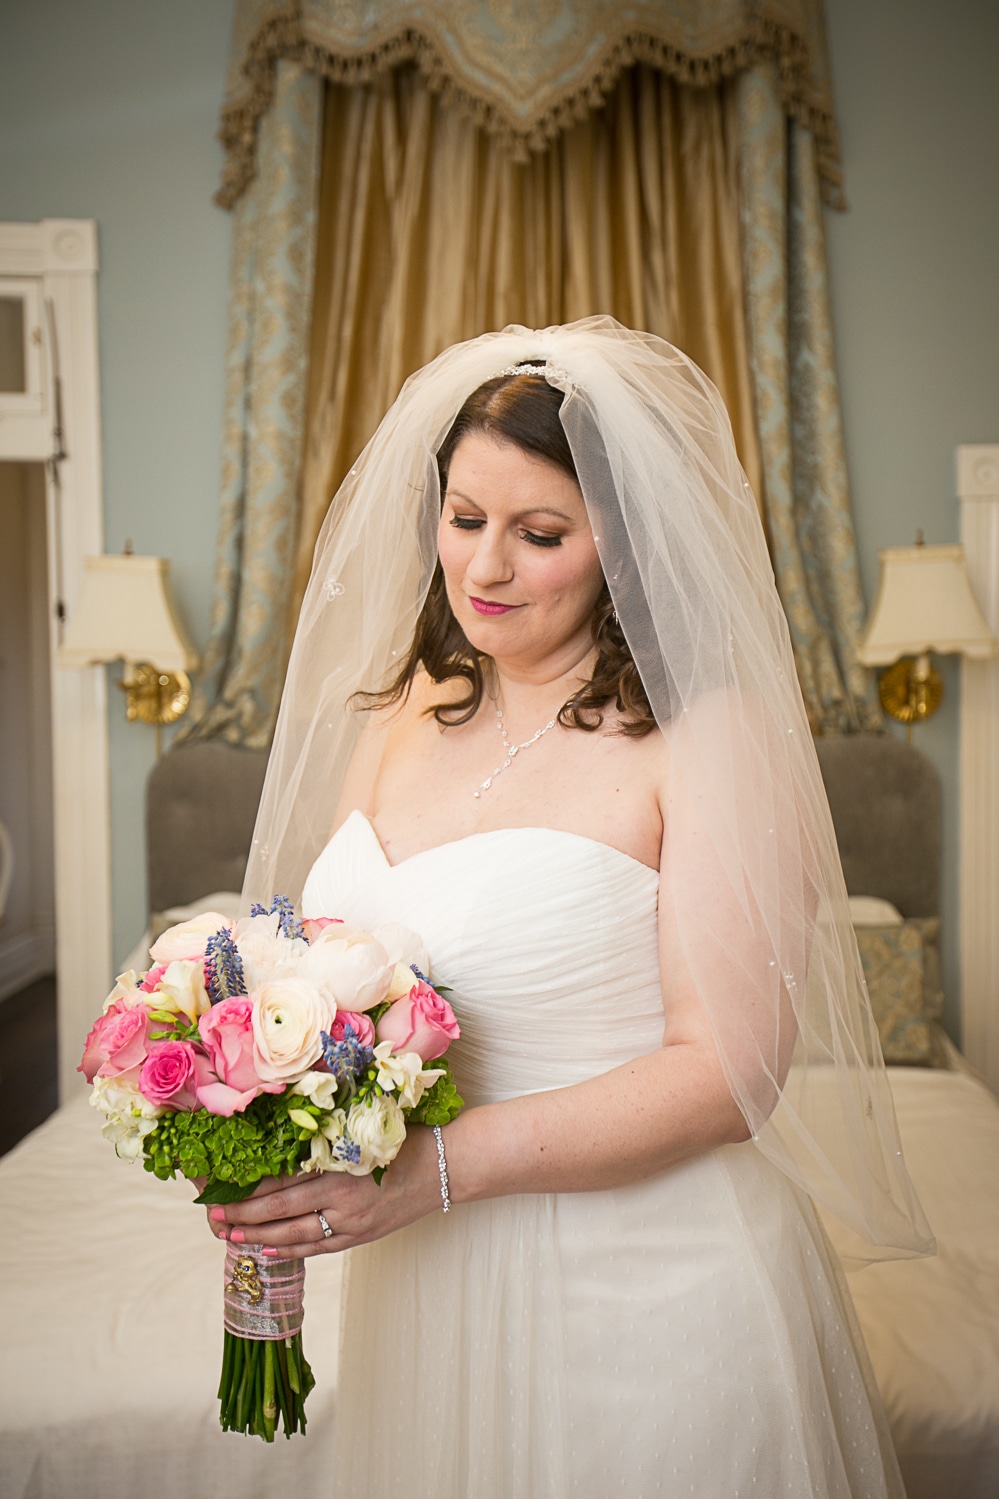 The bride in bridal suite at Carriage Lane Inn 